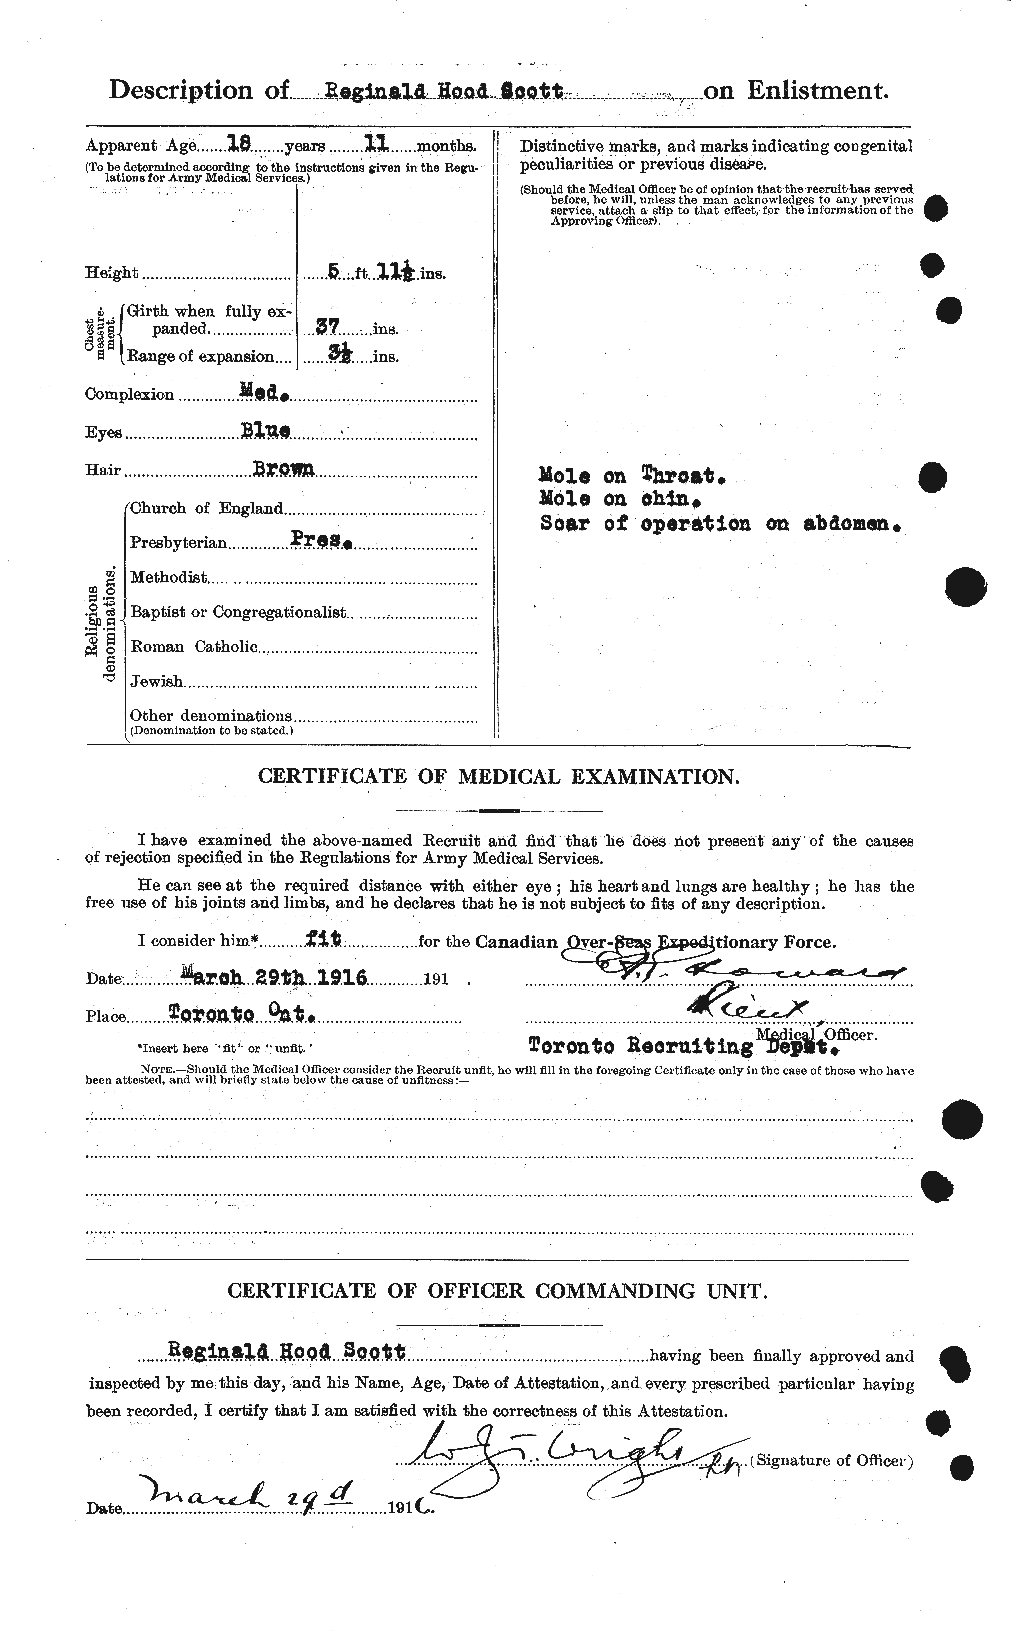 Personnel Records of the First World War - CEF 090194b